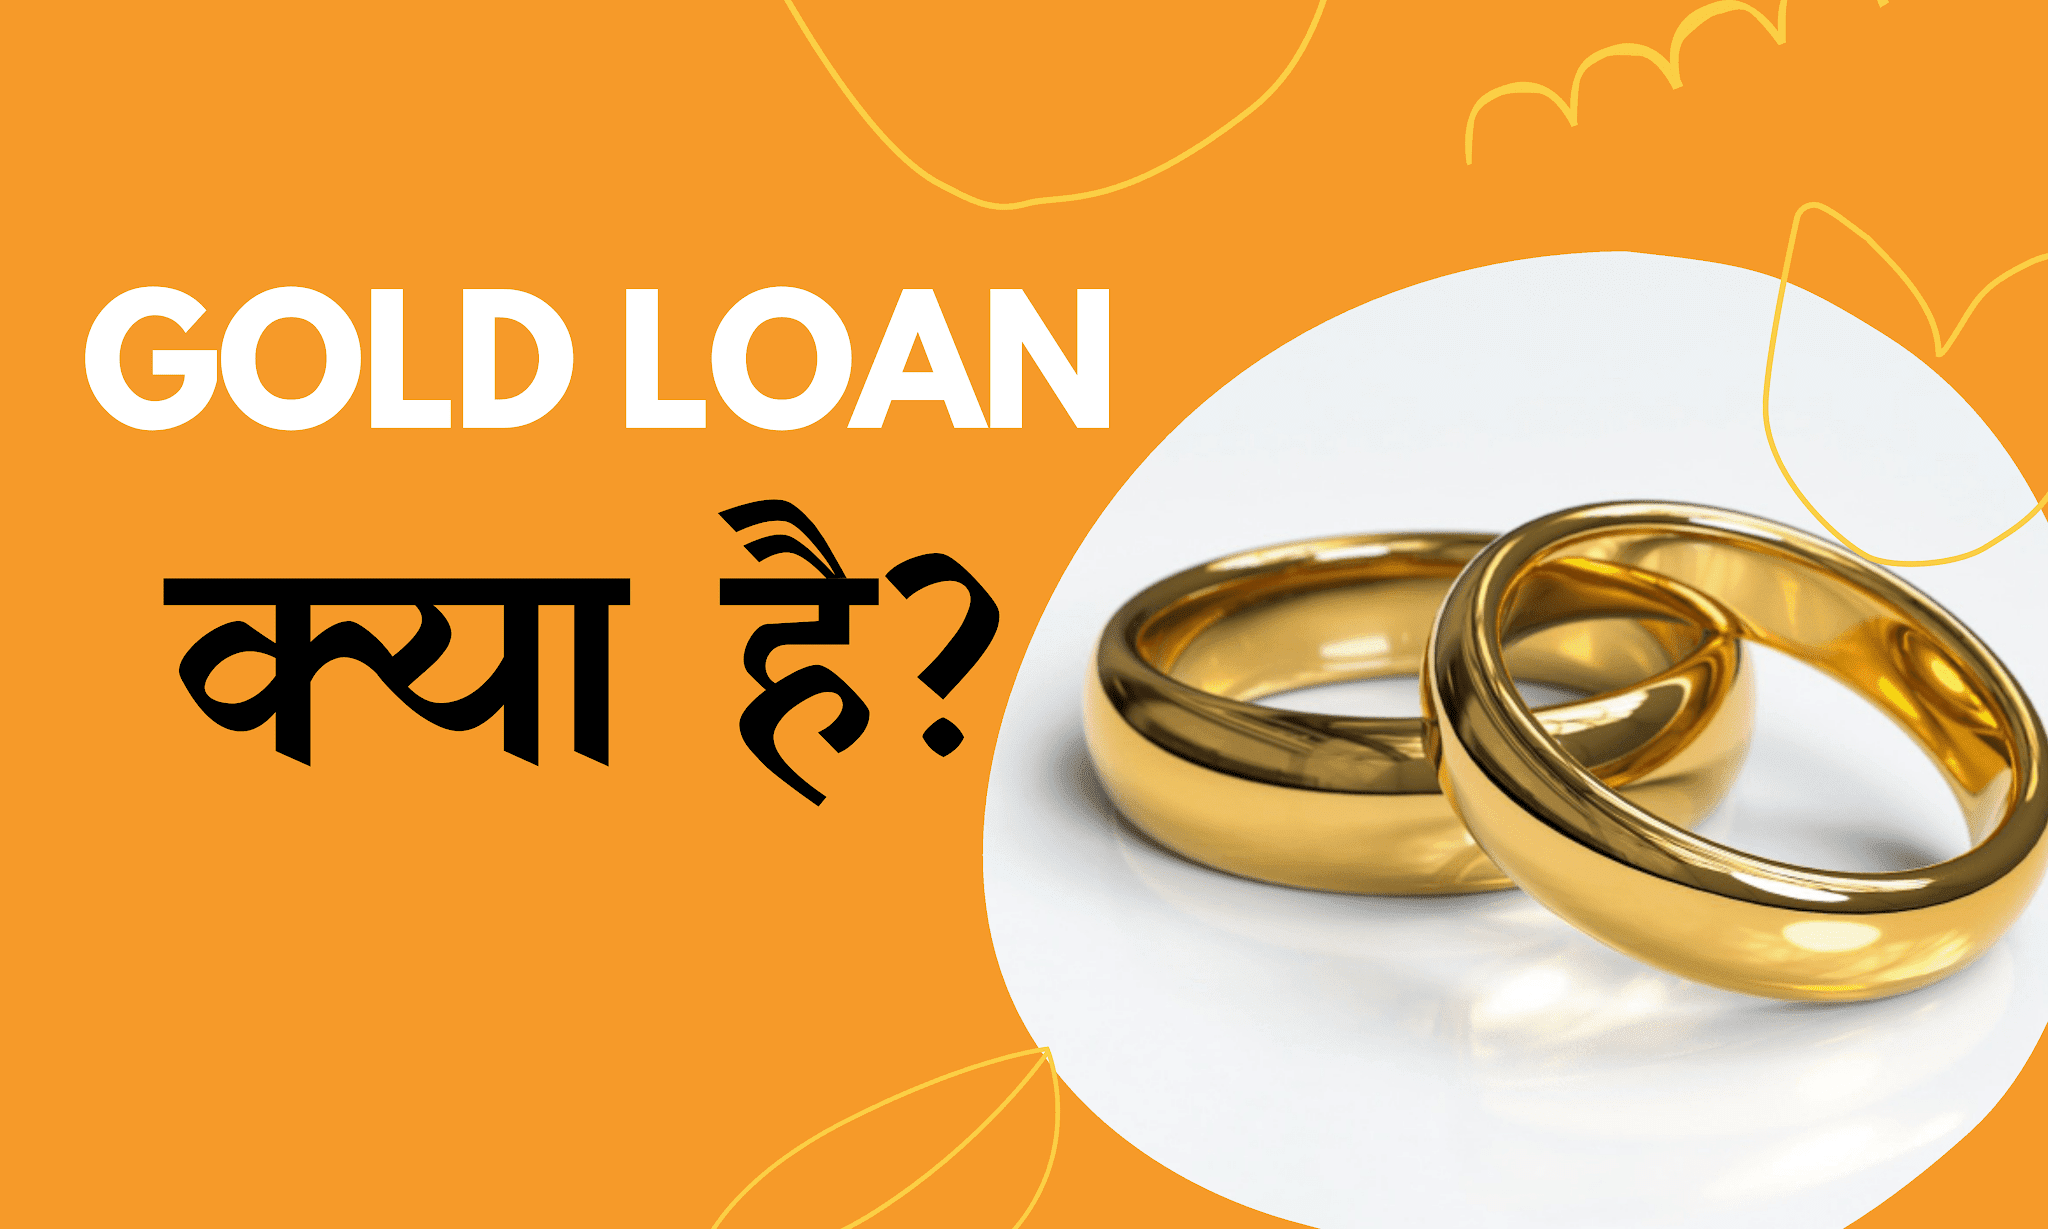 Importance of loan, Advantages of loan, Example of loan, Personal loan, What is loan management, What is bank loan, What is Loan in Hindi, Types of loan, What are the 4 types of loans?